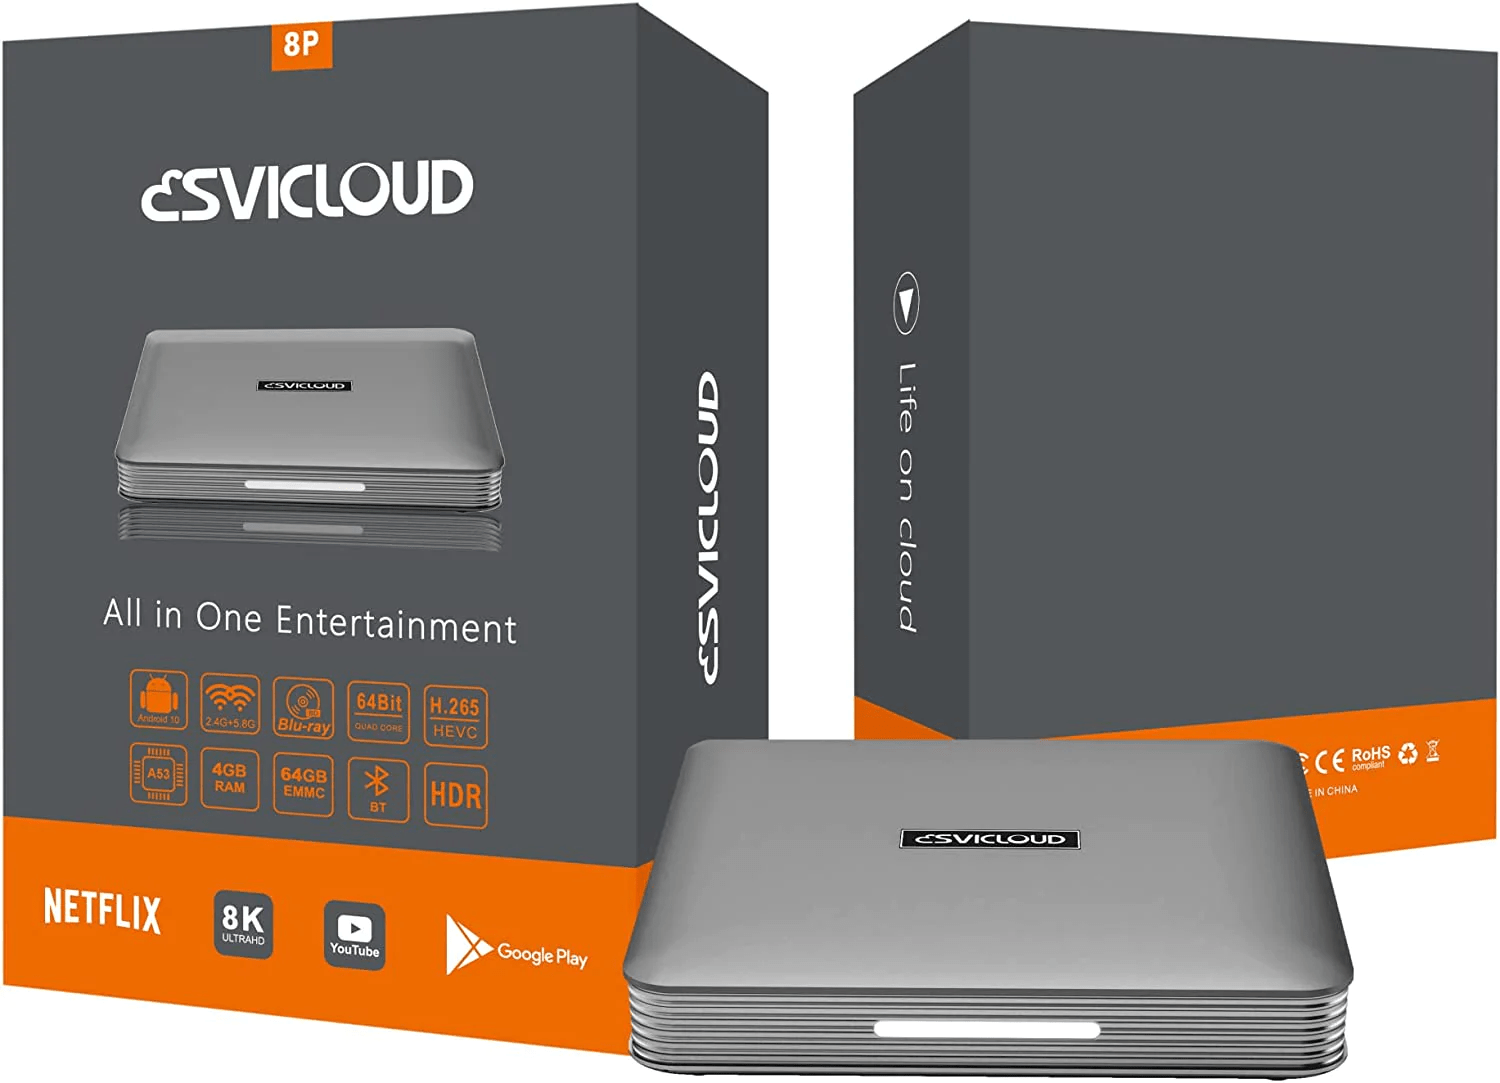 Seven individuals were arrested by Taiwanese officials for the distribution of the notorious SviCloud streaming boxes.